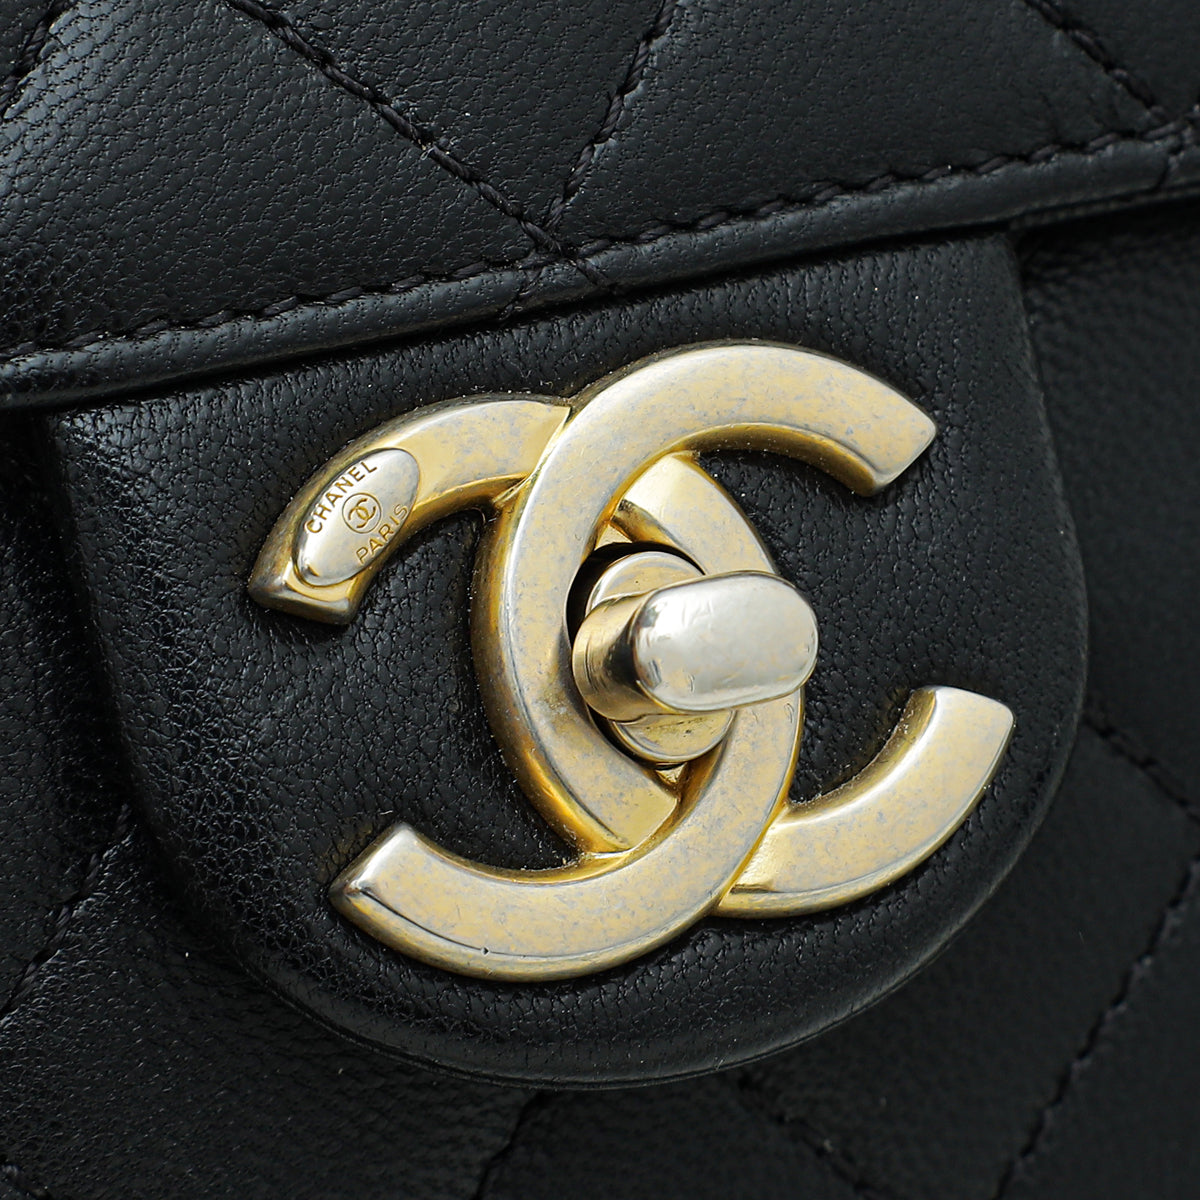 Chanel Black Chic Pearls Flap Small Bag – The Closet